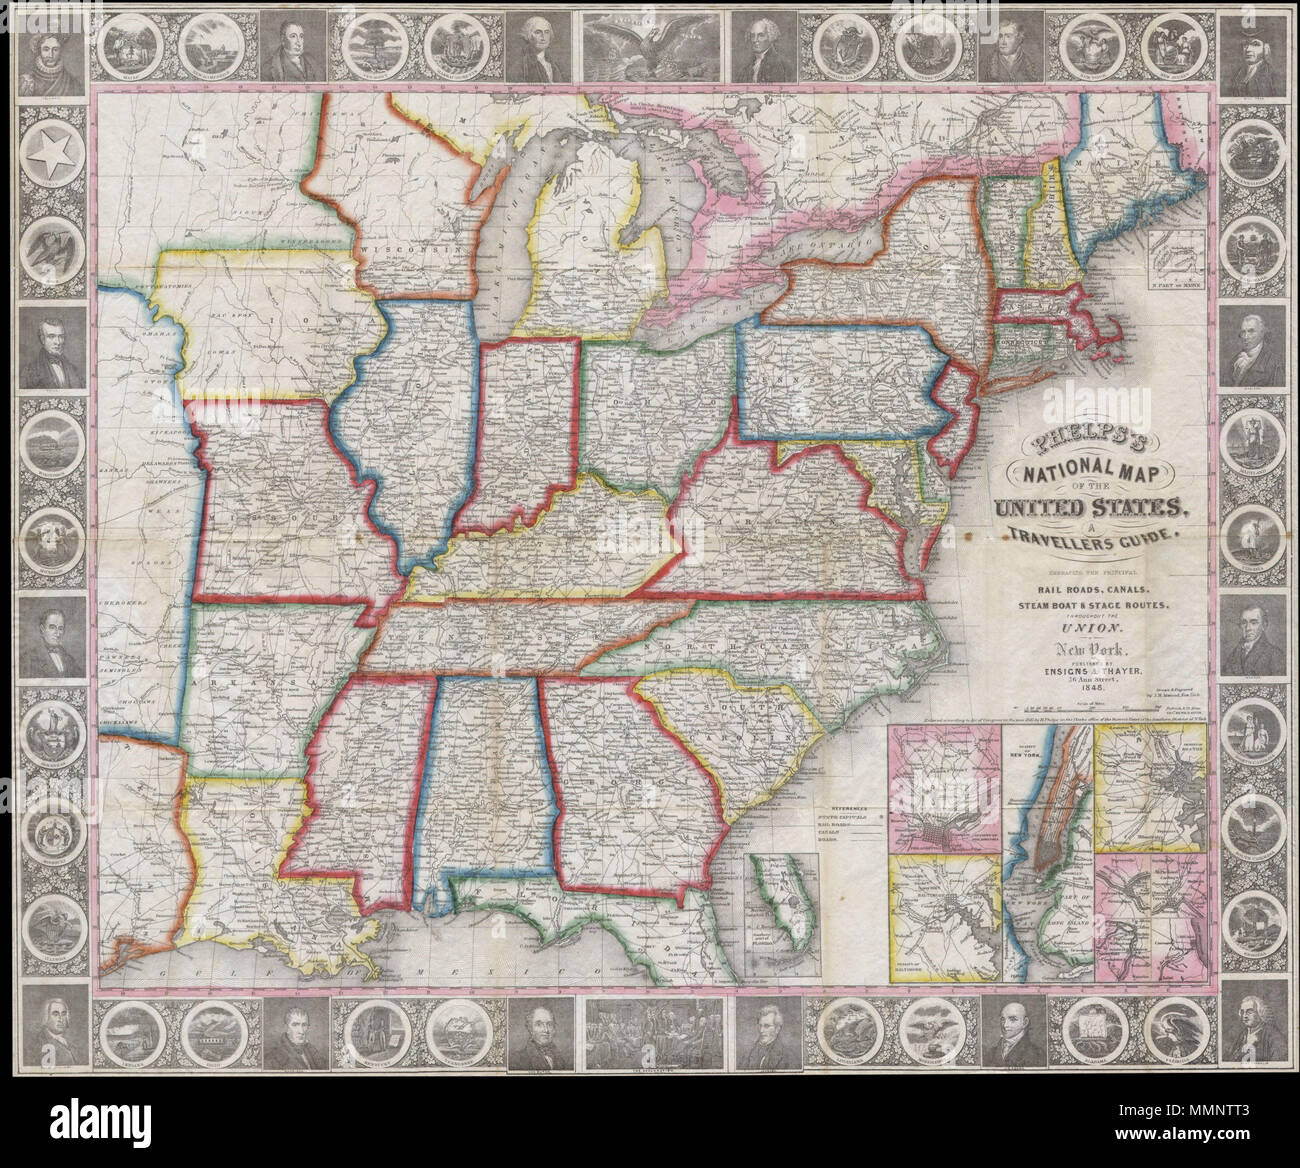 .  English: This is a rare 1848 issue of the first state of Phelps’s map of the United States. Covers most of the eastern portion of the United States bounded on the west by Texas and two large unnamed territories to the north. Insets in the lower right quadrant illustrate seven important port cities: New York, Philadelphia, Baltimore, Boston, Birmingham, Cincinnati, St. Louis and Chicago. Two smaller map insets depict southern Florida and Northern Maine, the extremes of both of which are just off the map. The whole is surrounded by a fine decorative border depicting 30 alternating state seals Stock Photo